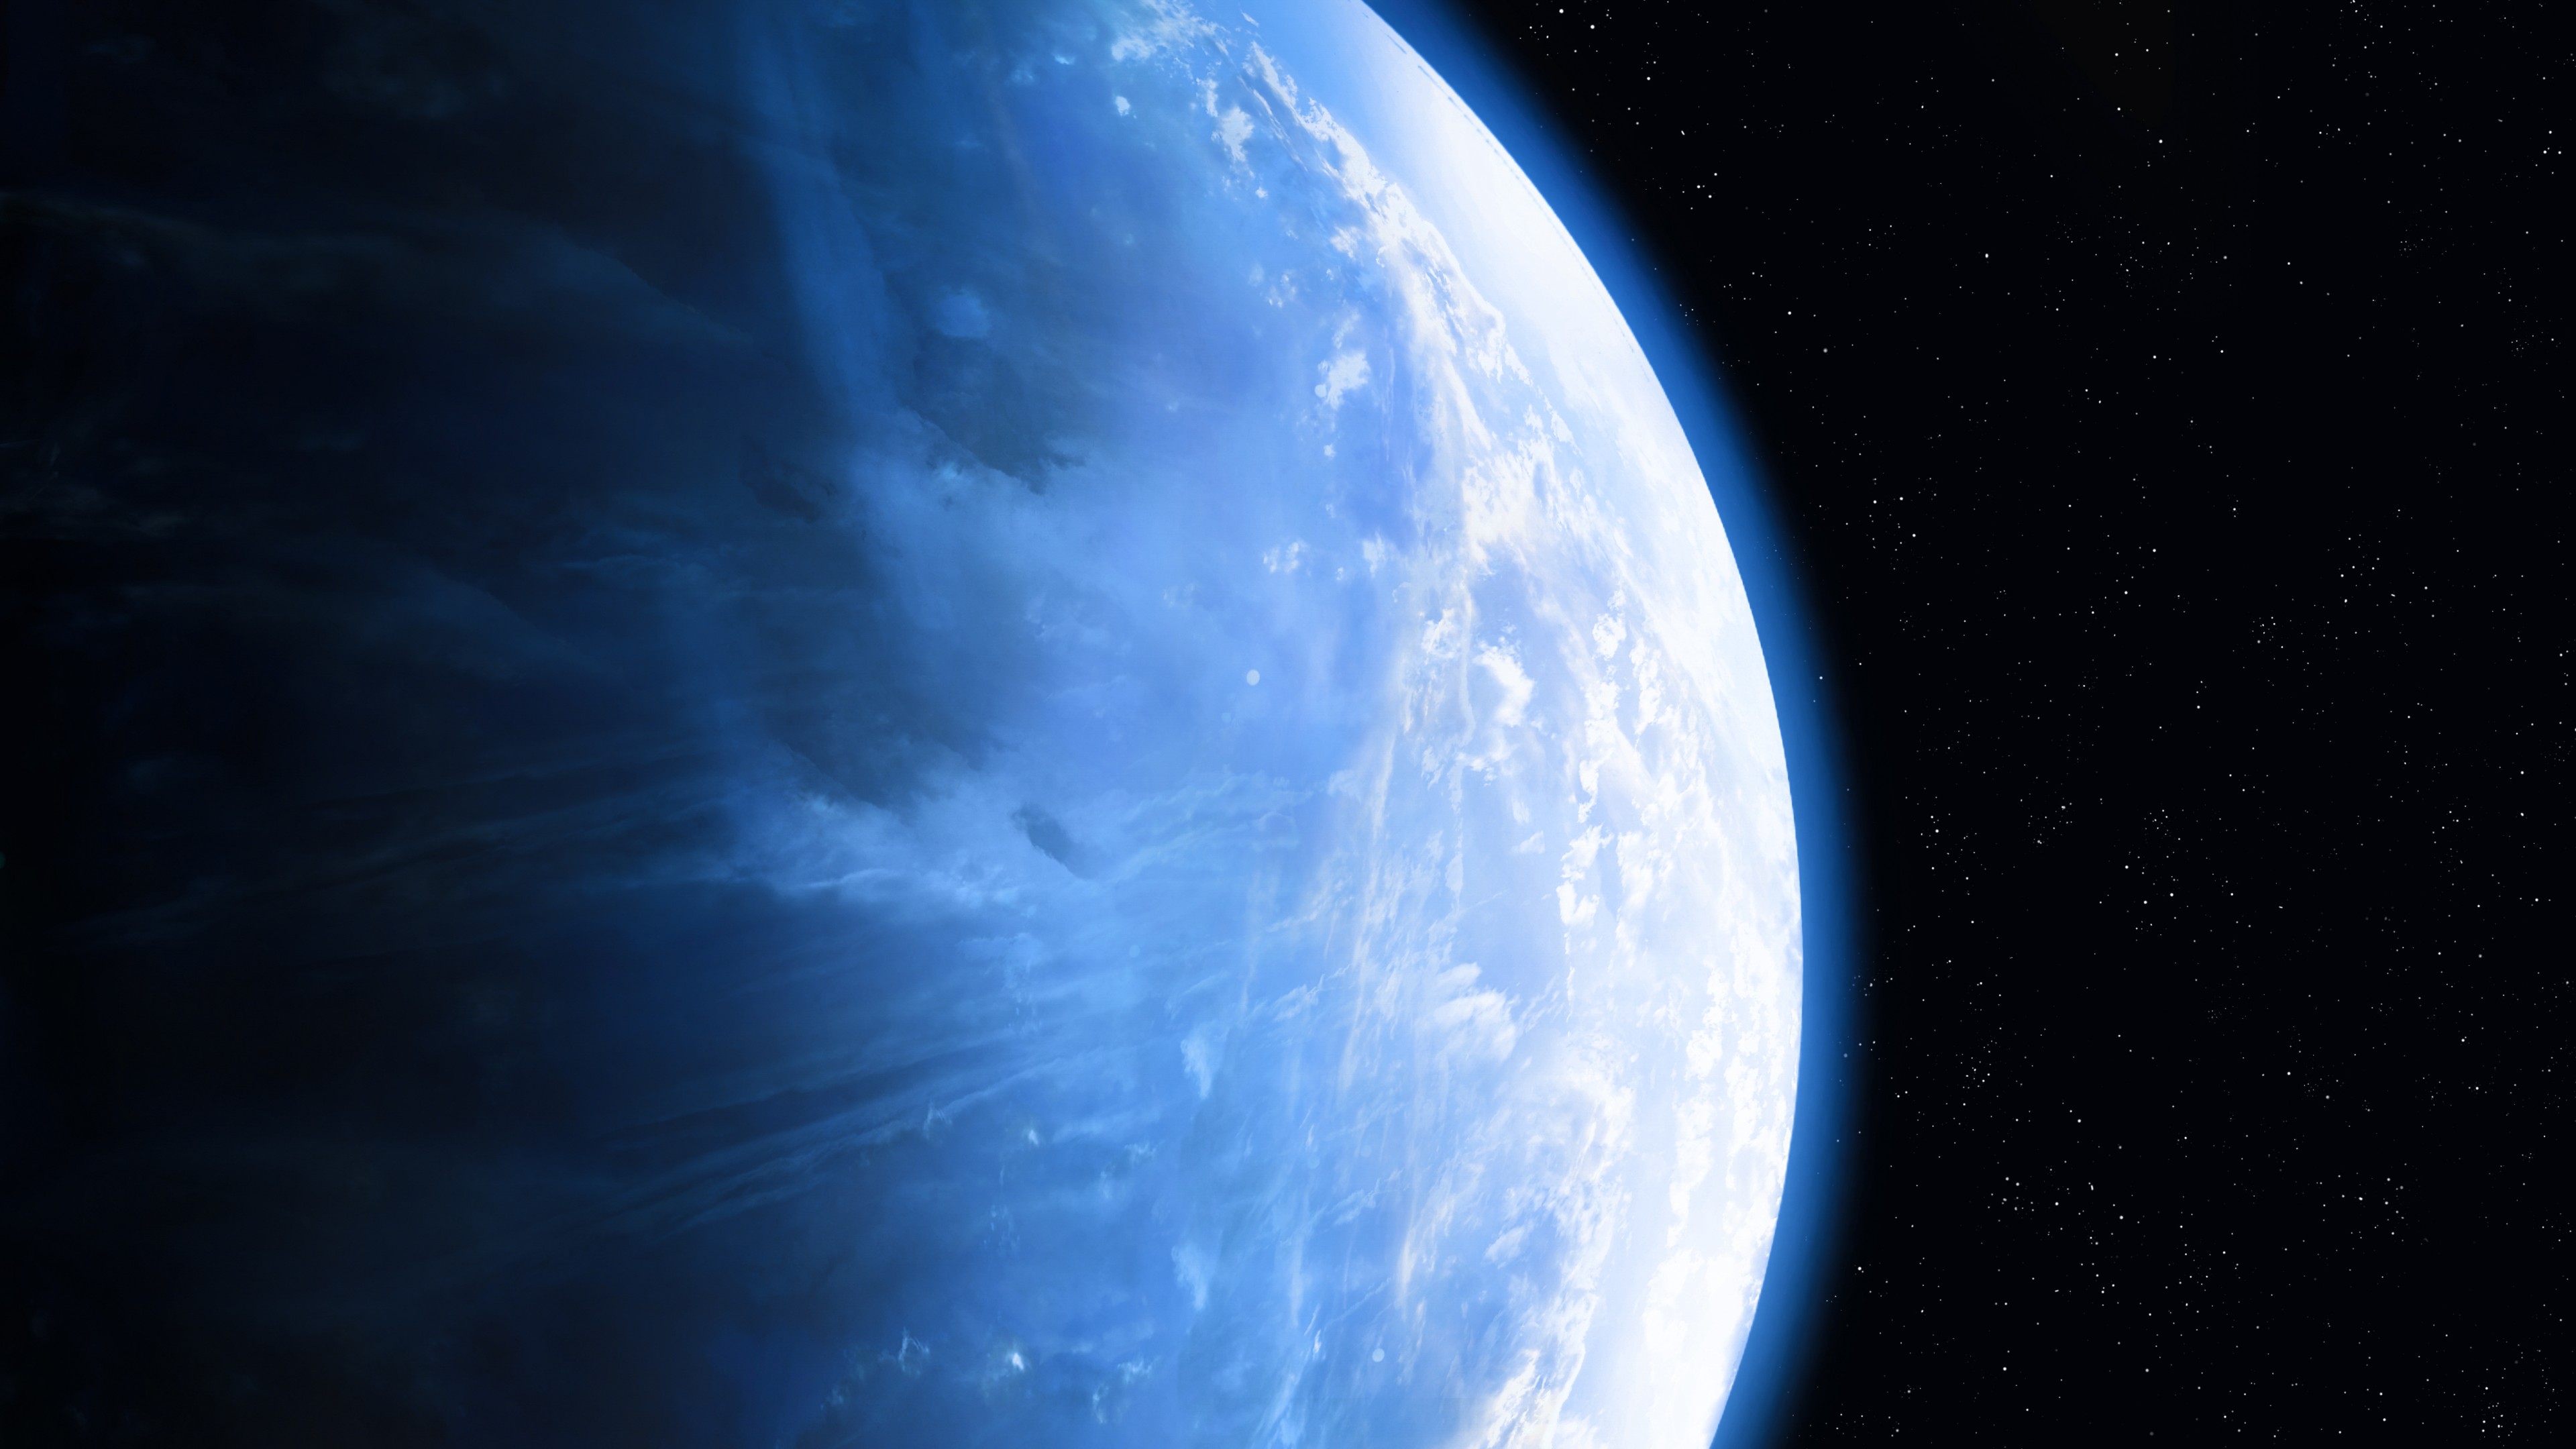 A striking view of a blue planet, similar to earth, seen from space with part of its surface illuminated by sunlight against a starry background.